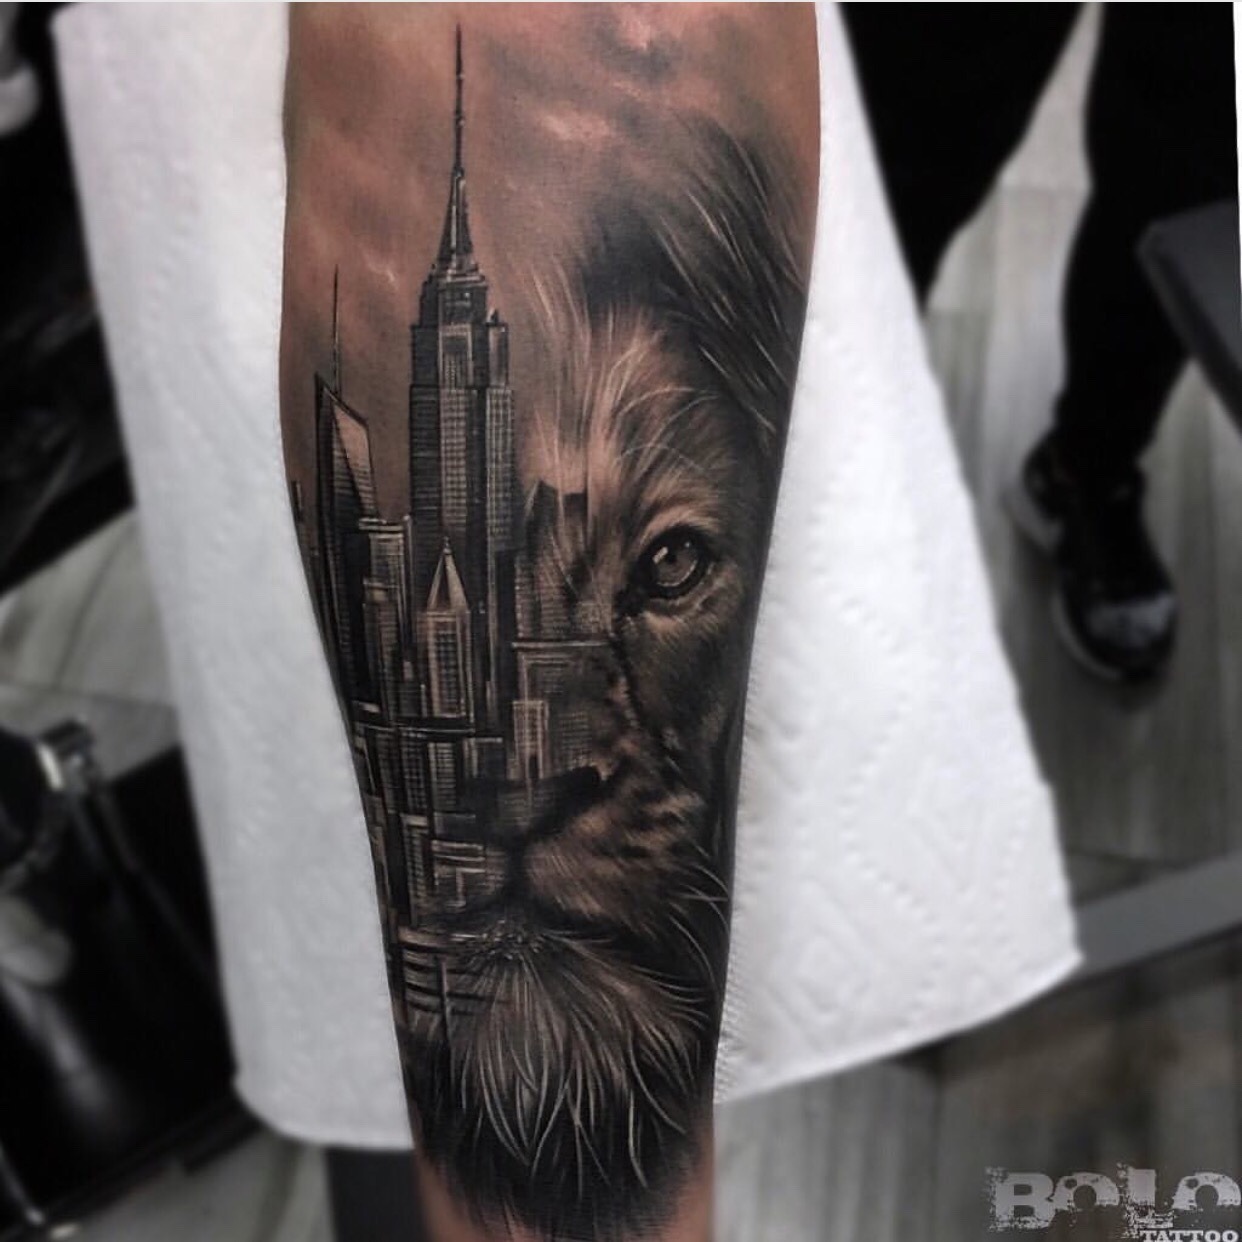 My tattoo: King of the concrete jungle. submitted... - INKPEDIA